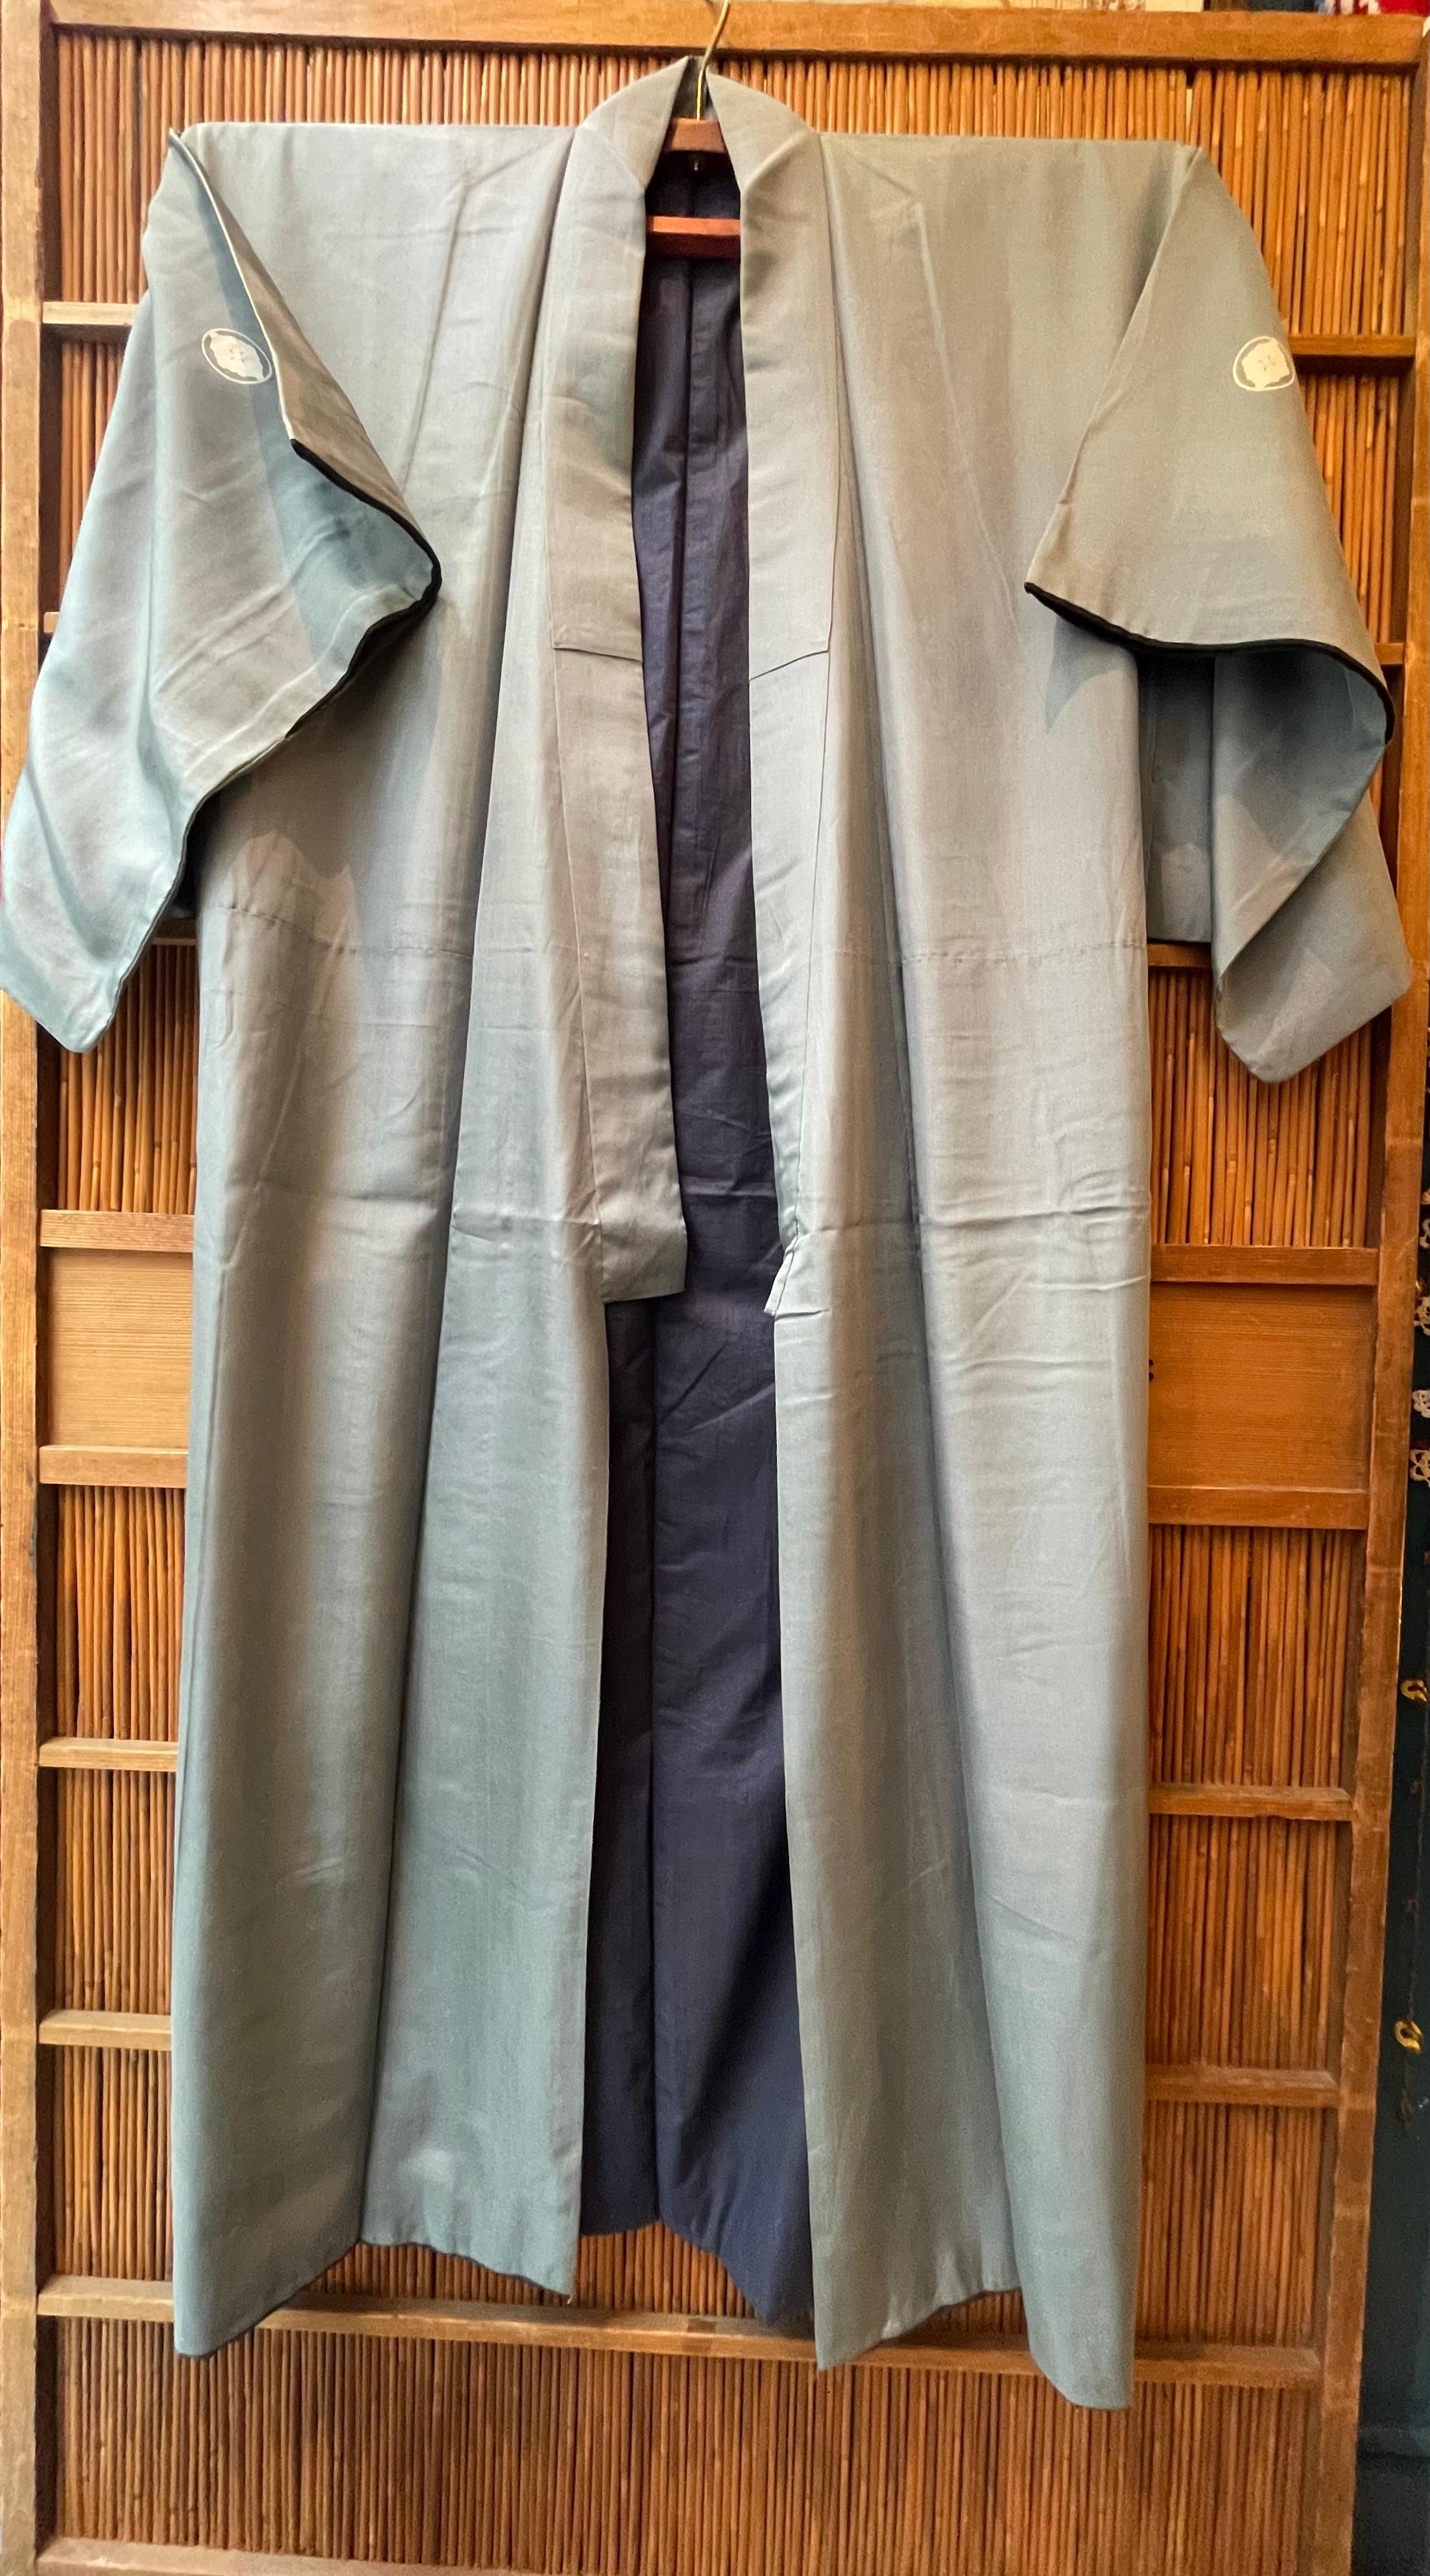 This is a men's silk Kimono. The color outside is sky blue and inside is in dark blue.
It has a family crest called kamon. This kimono has one called 'maruni kenhana bishi', two on the front and one on the back.

Kimono is a traditional Japanese